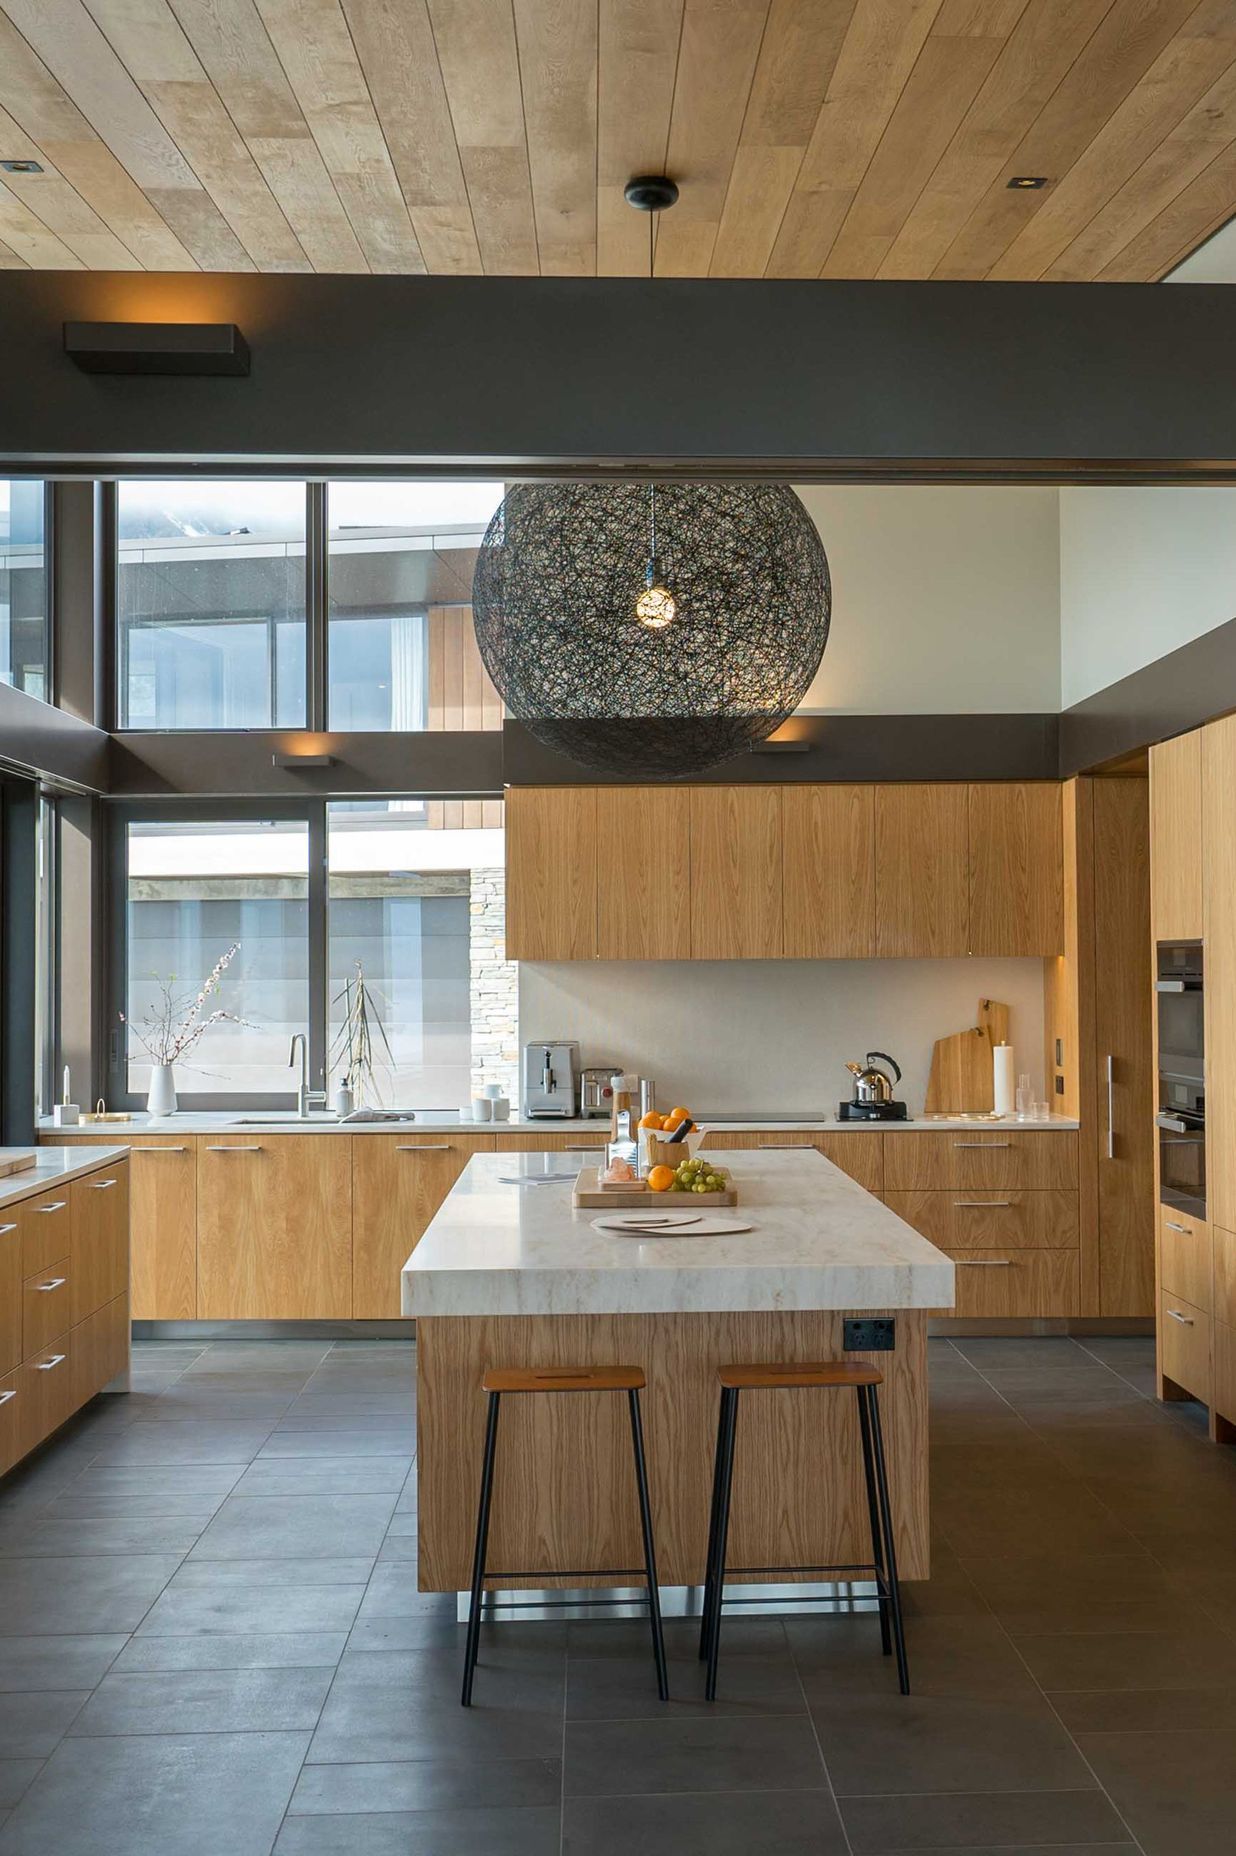 The kitchen overlooks a central courtyard. Photograph: ArchiPro.